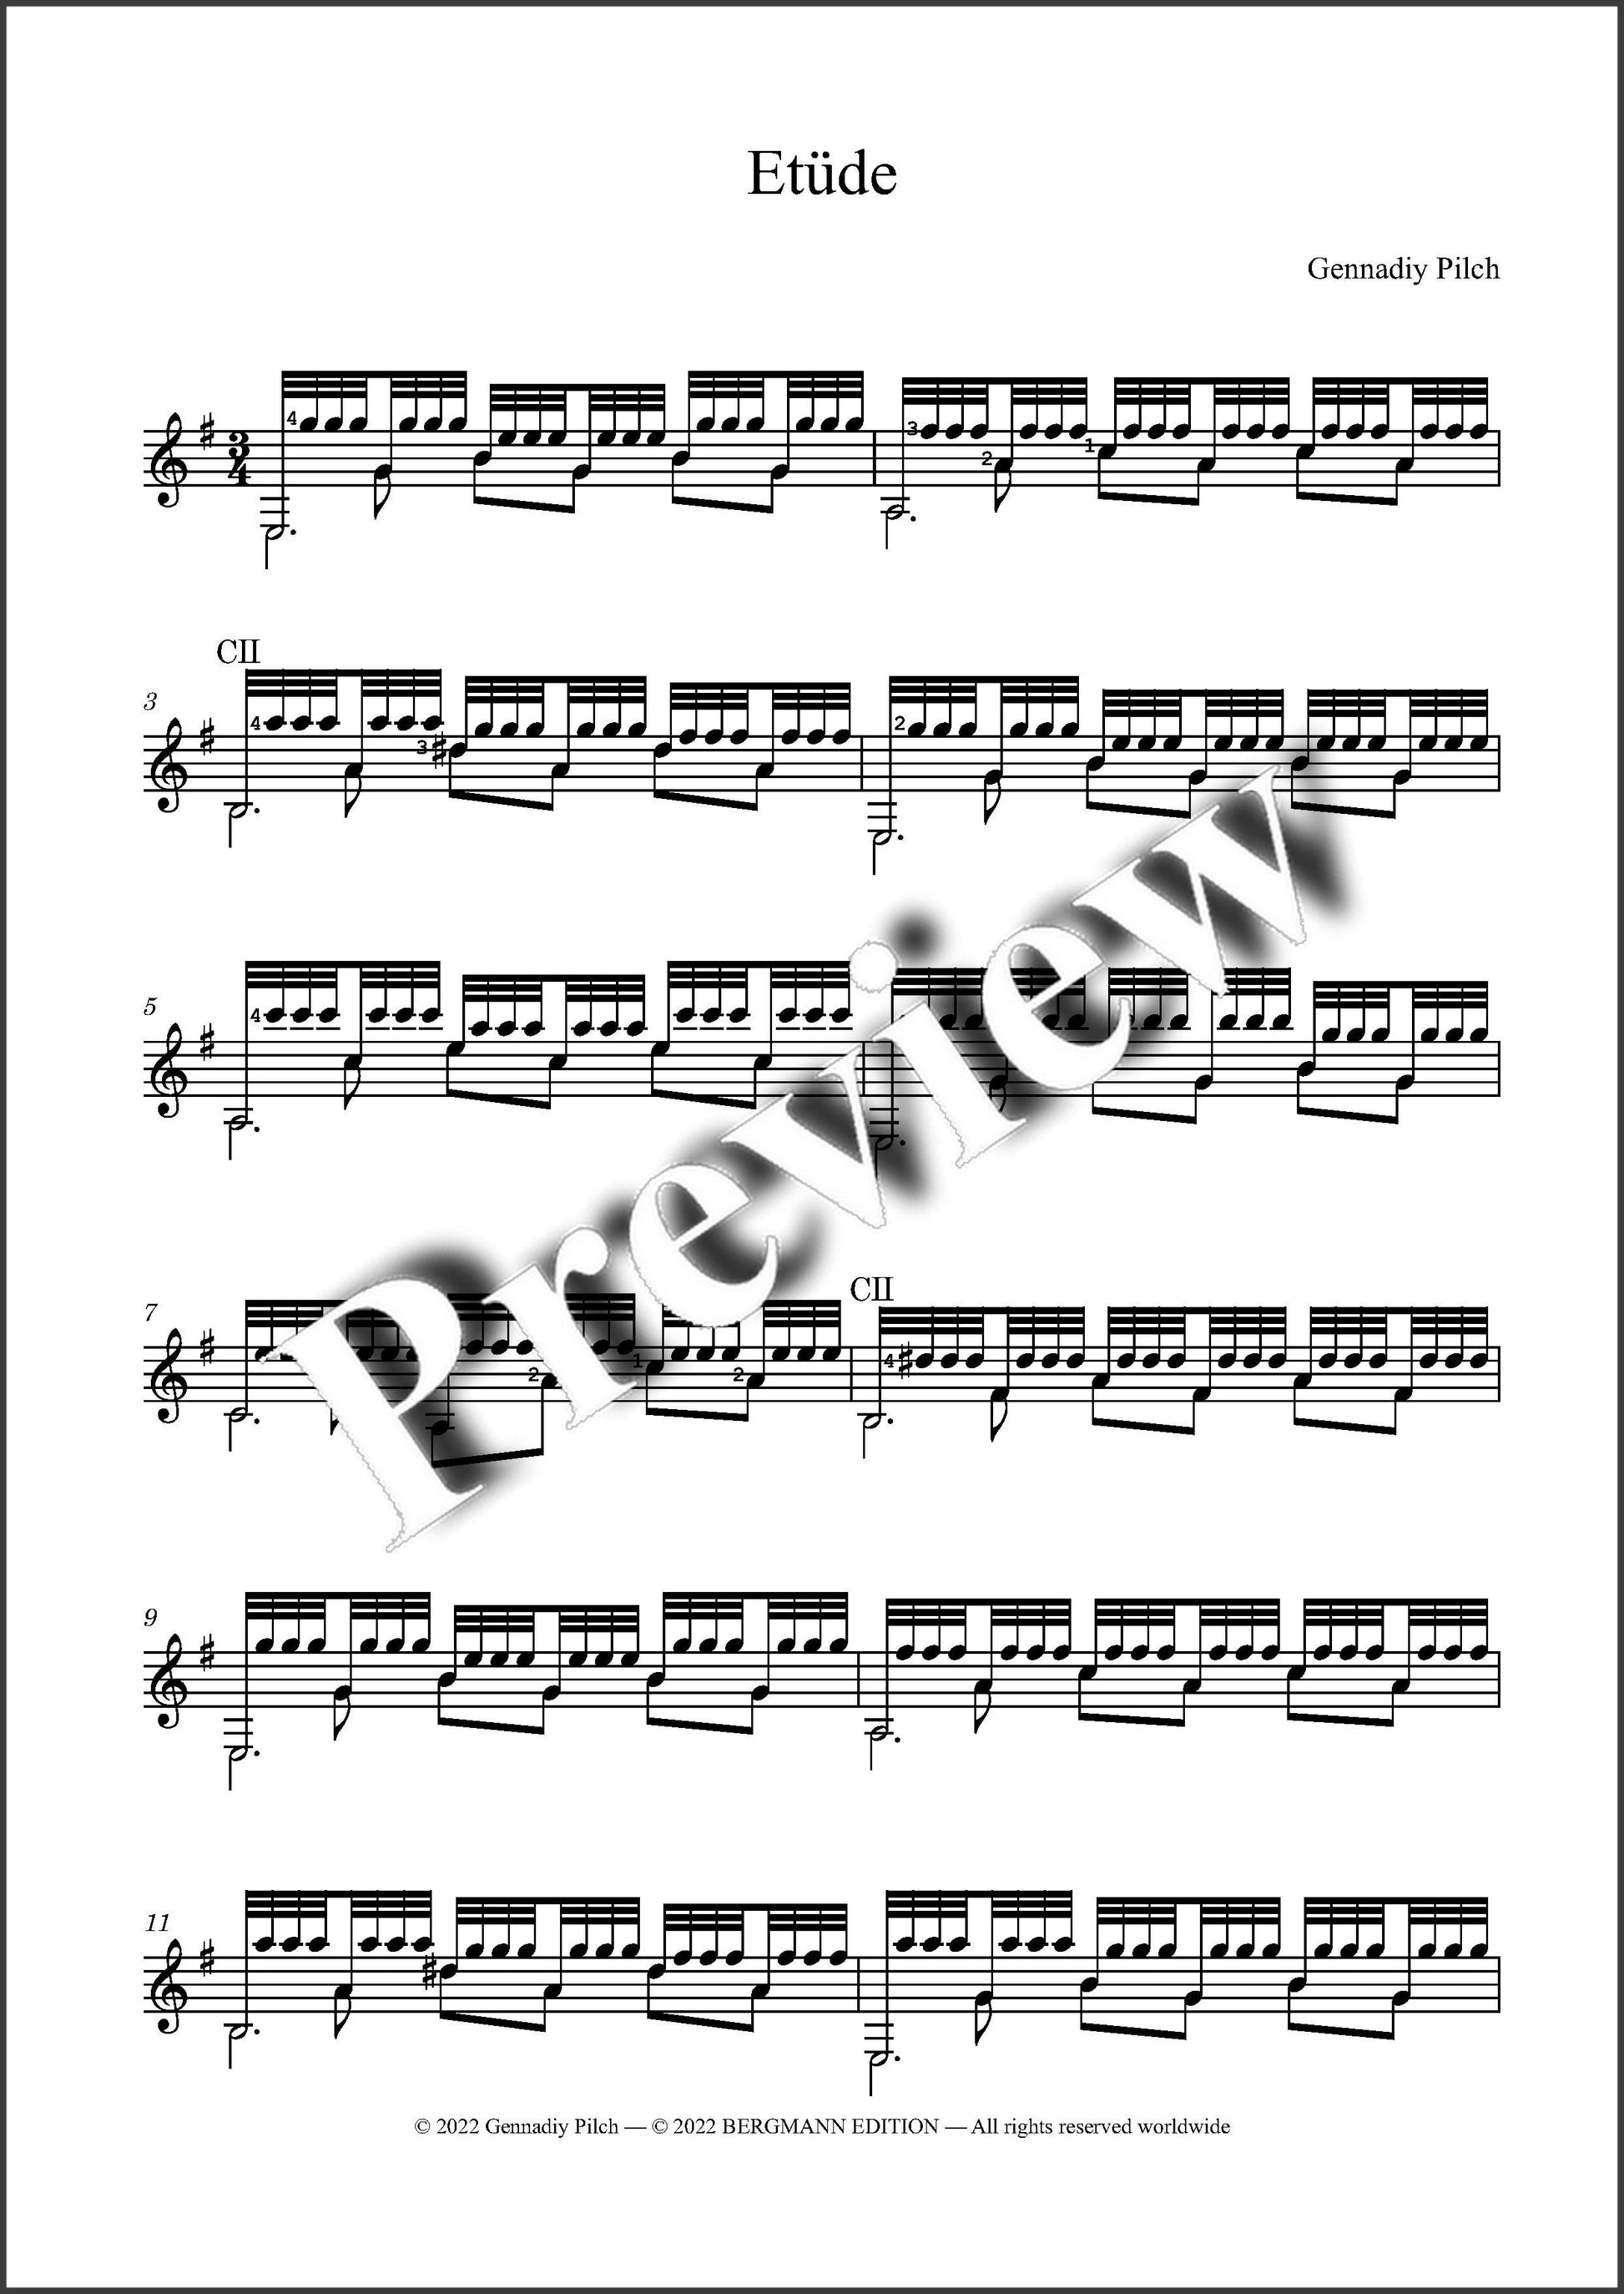 Gennadiy Pilch, Two Etudes - preview of the music score 1